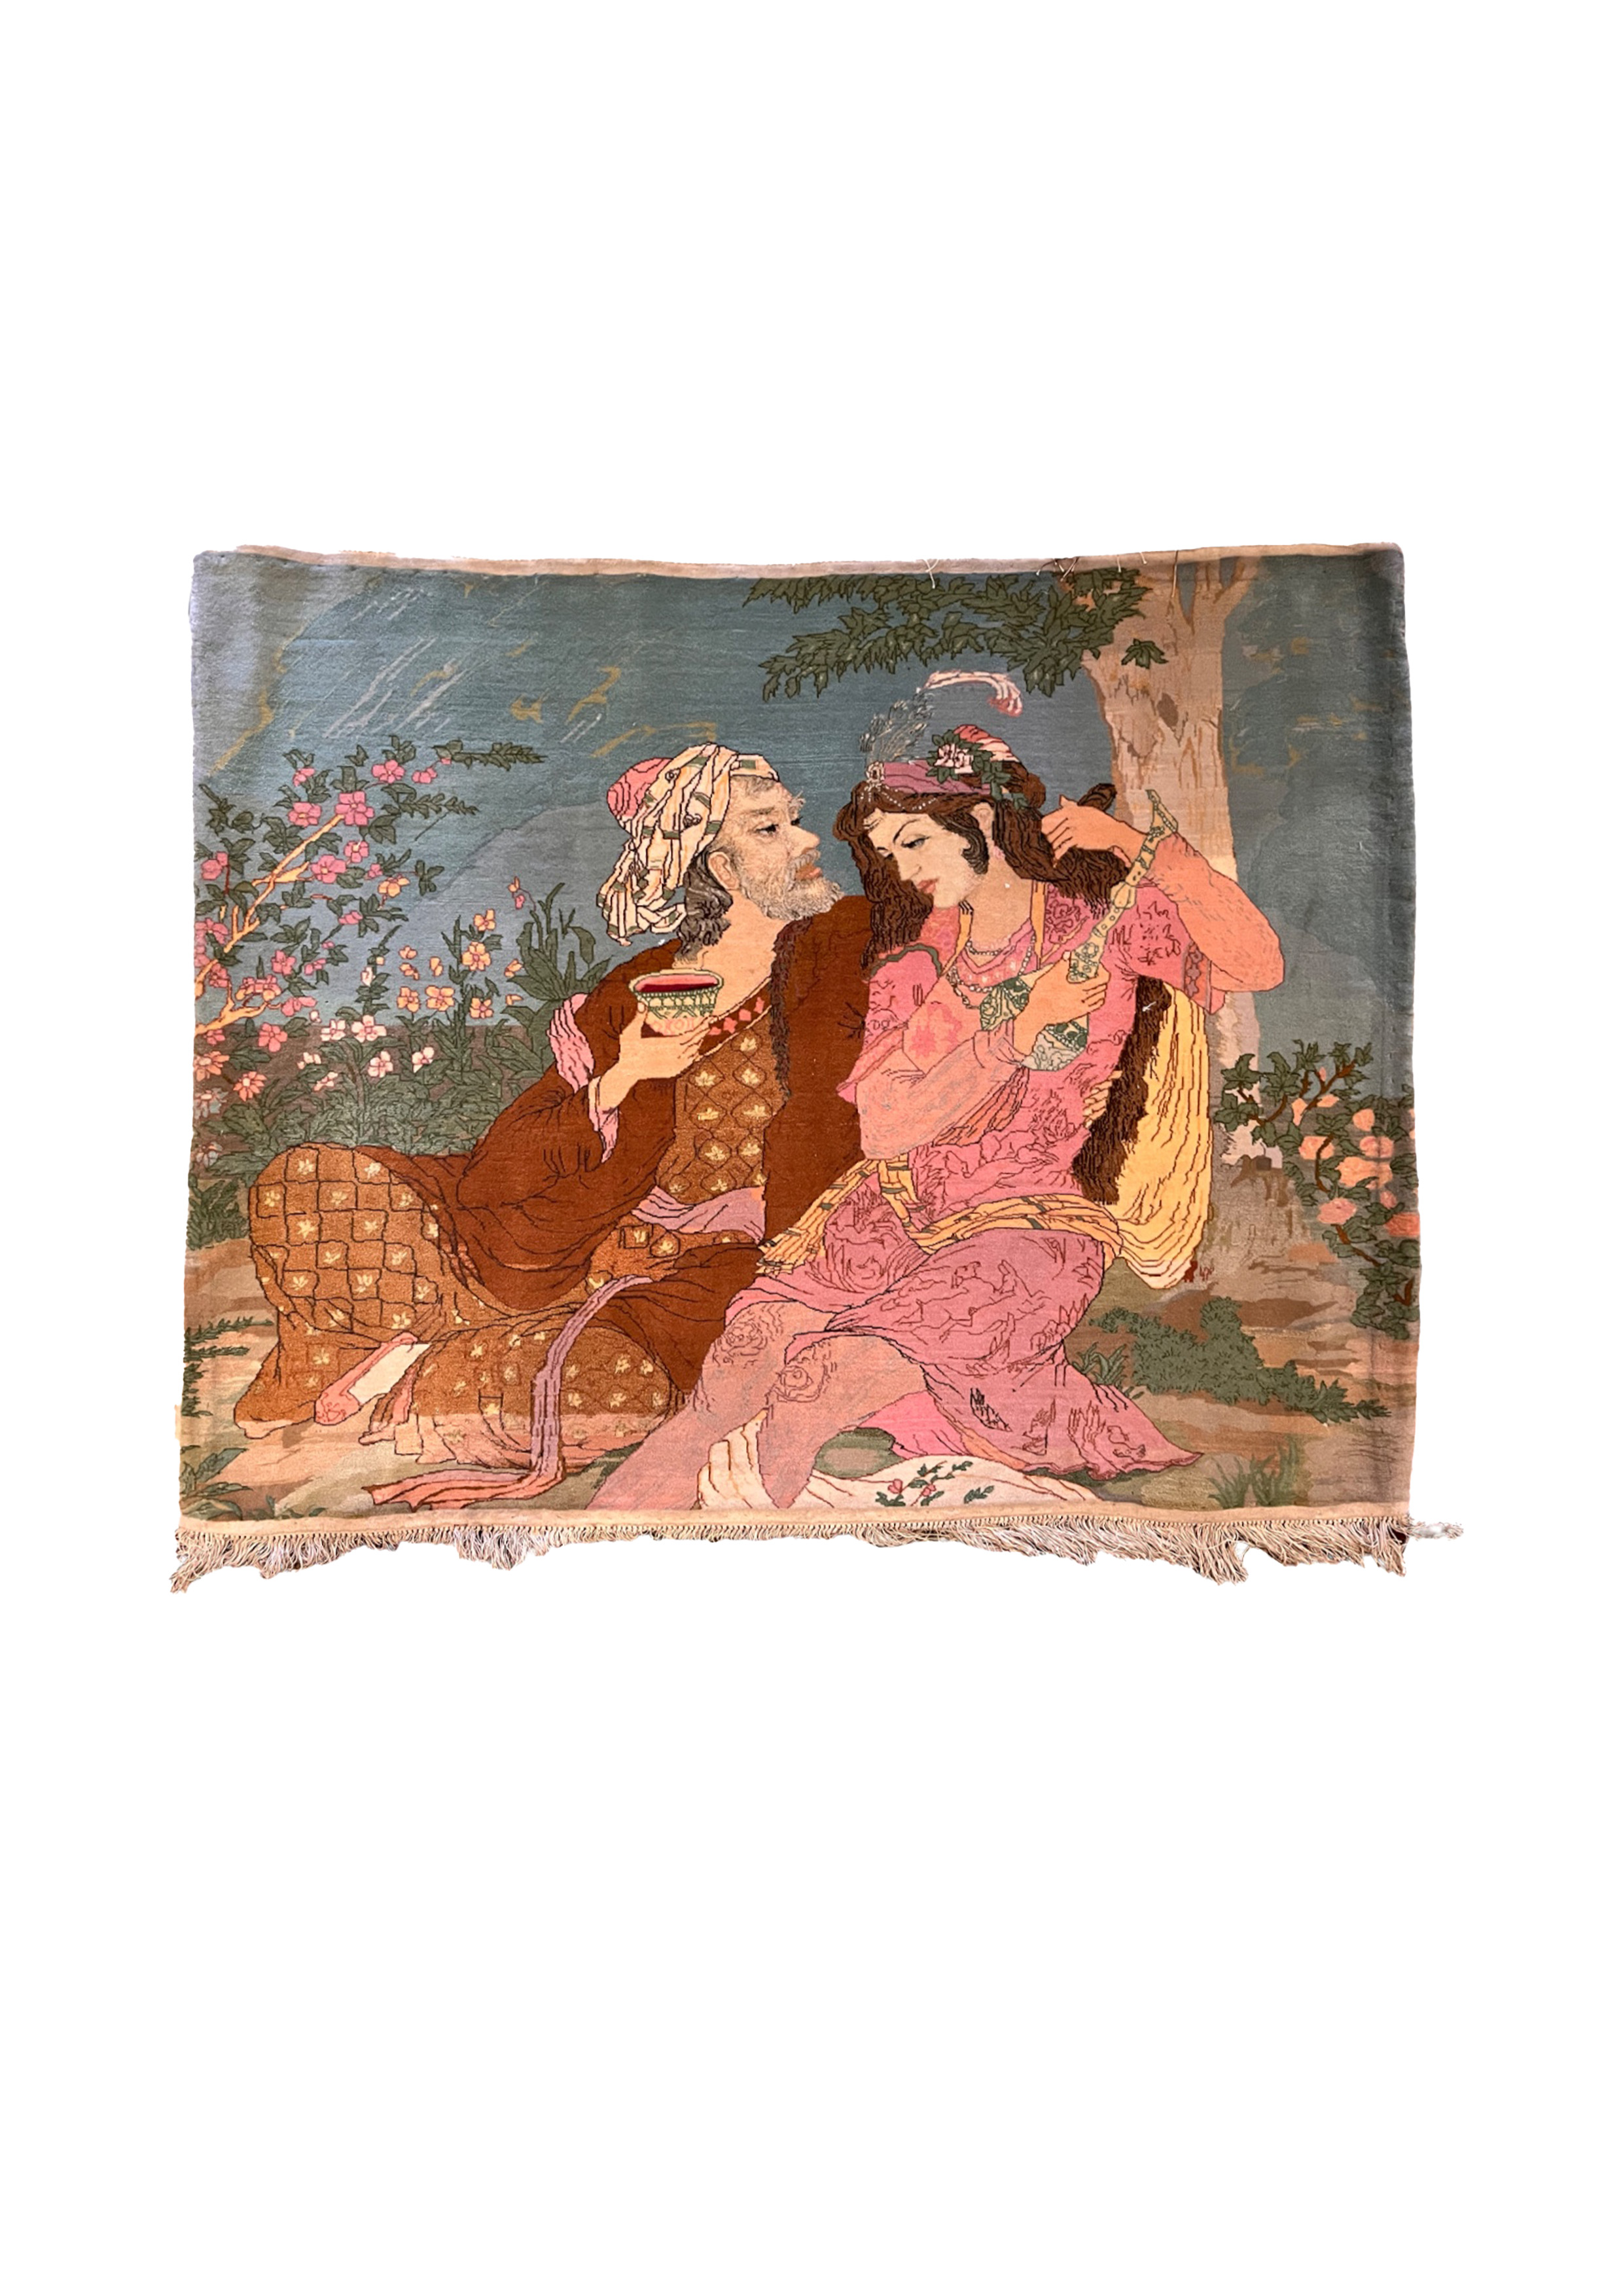 Circa 1940, Persian, A pictorial rug with two lovers